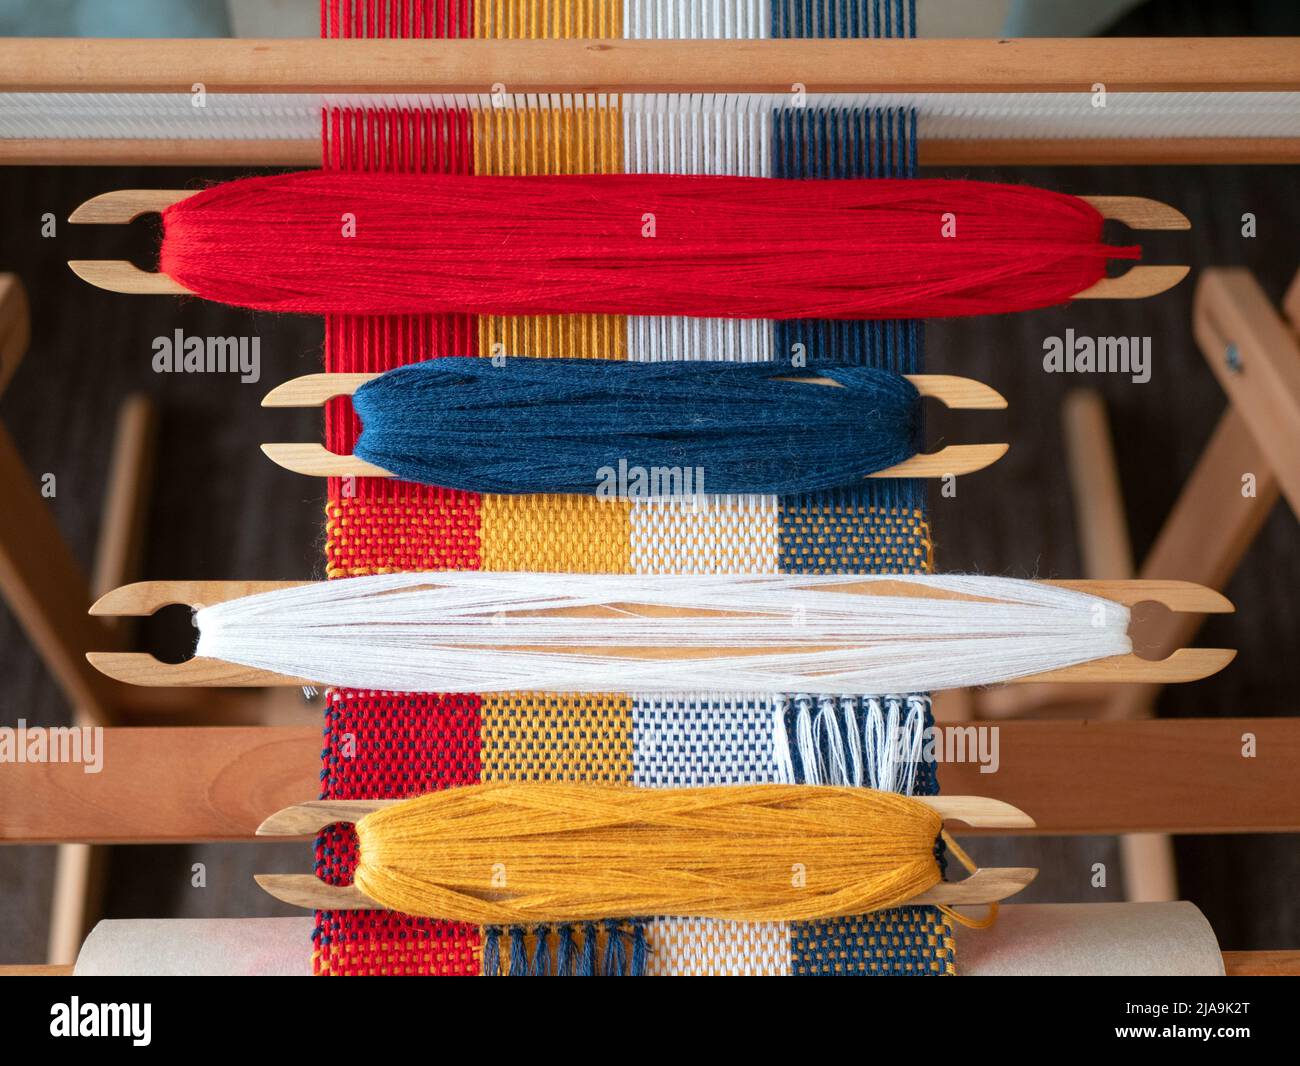 Four shuttles with yarn of different colors on the loom. Weaving shuttles with blue, white, red and yellow threads on the weaving project Stock Photo